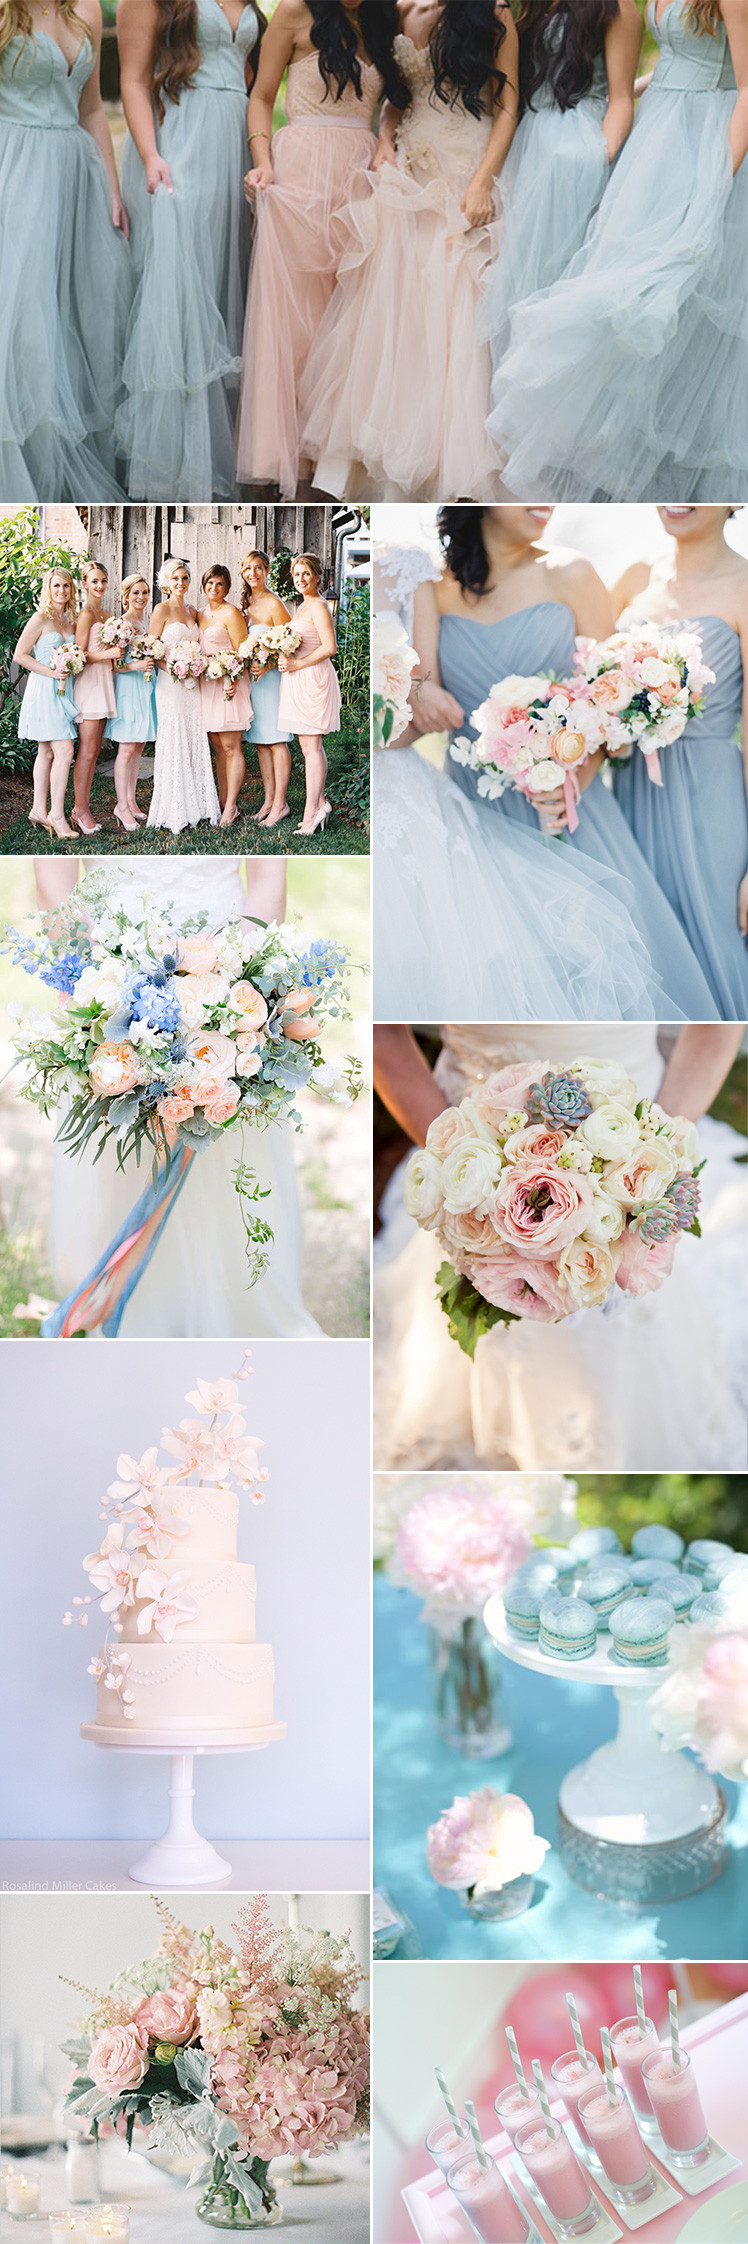 Blue And Pink Wedding Colors
 Pink & Blue Wedding Ideas Inspired by Pantone Glitzy Secrets